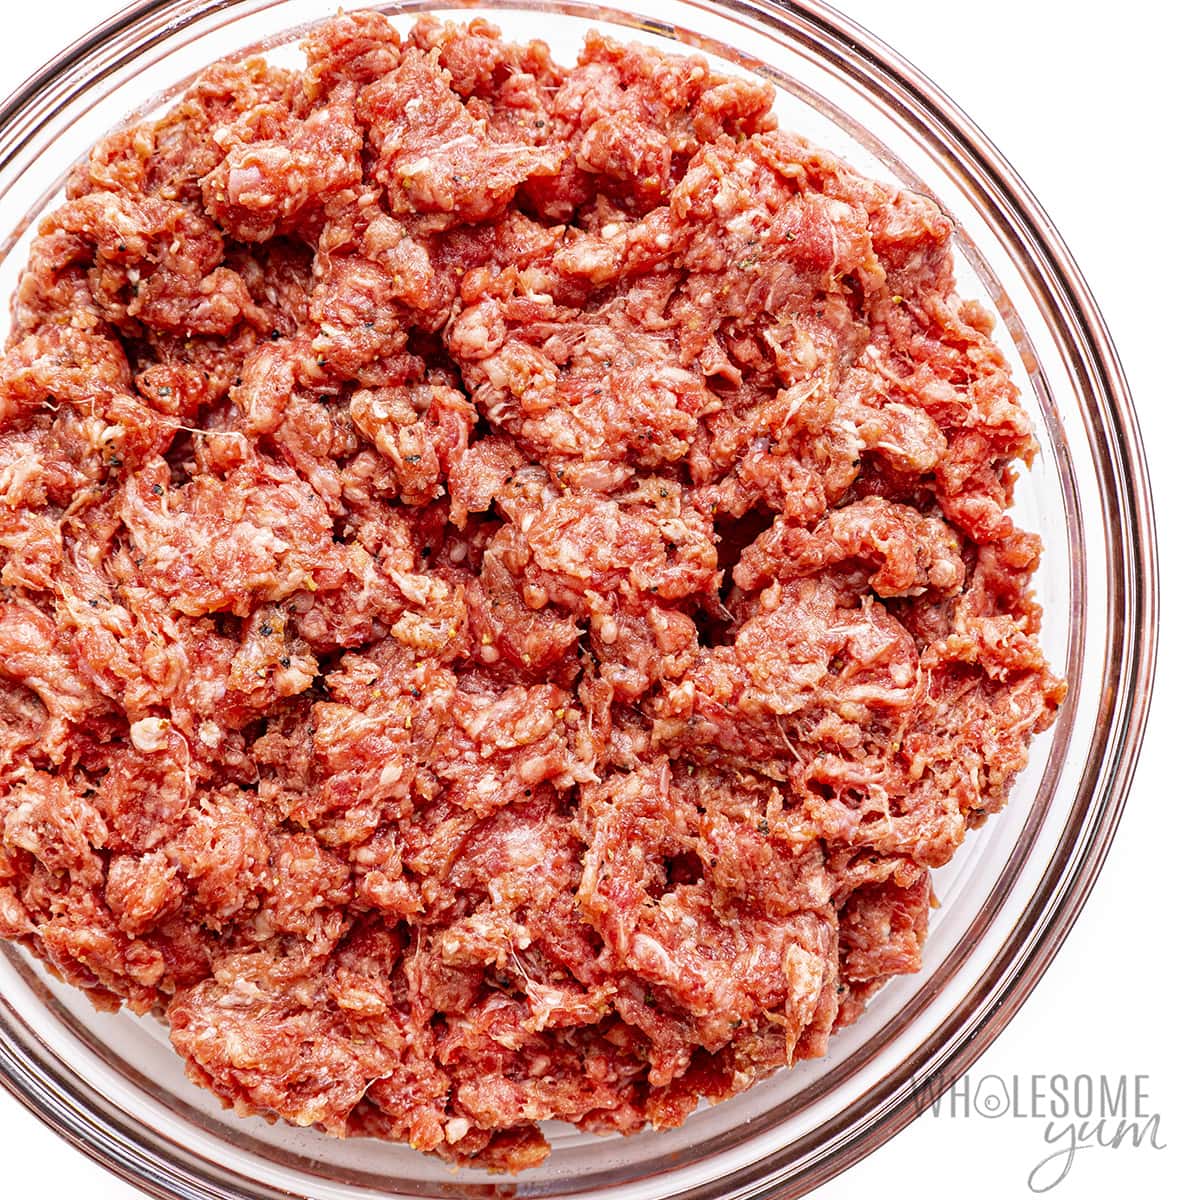 Raw ground beef in a bowl.